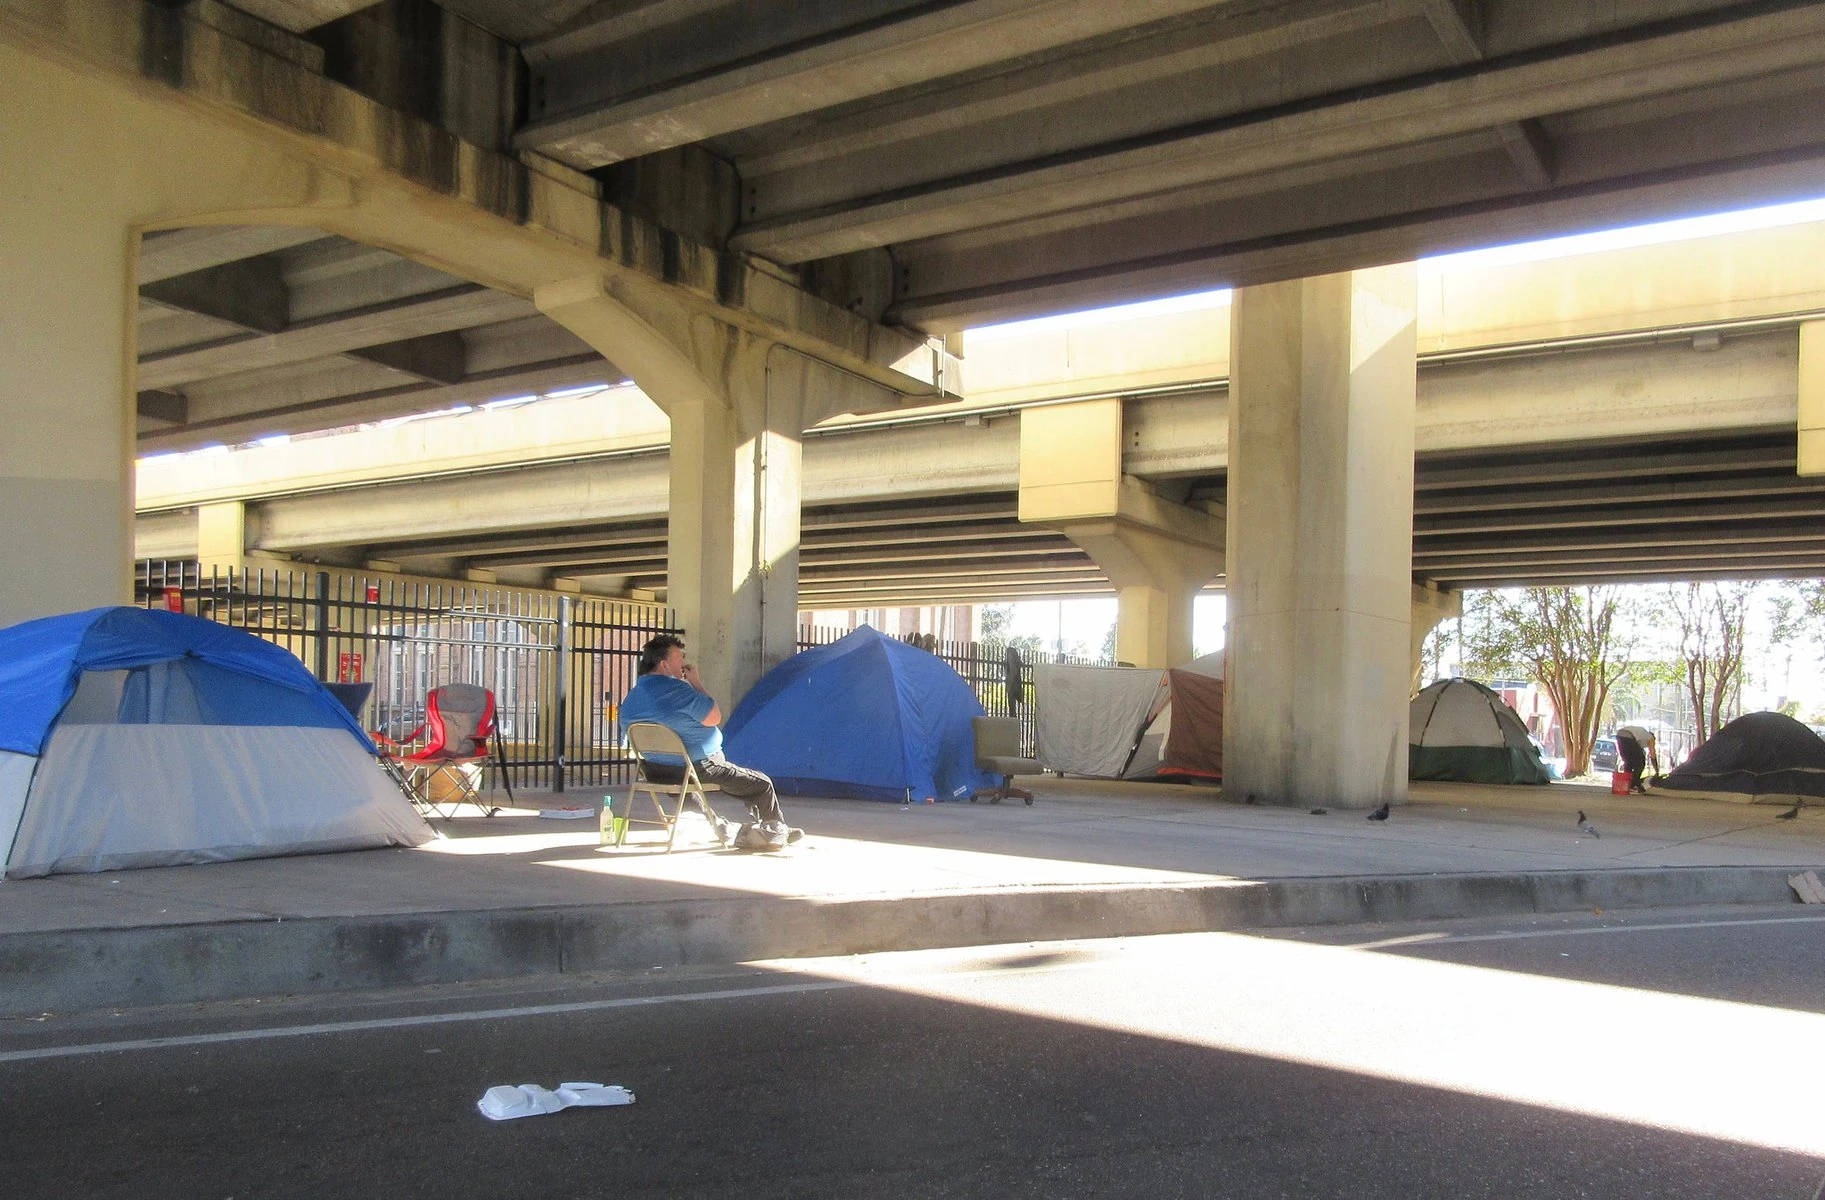 A homeless encampment in New Orleans beneath an expressway.